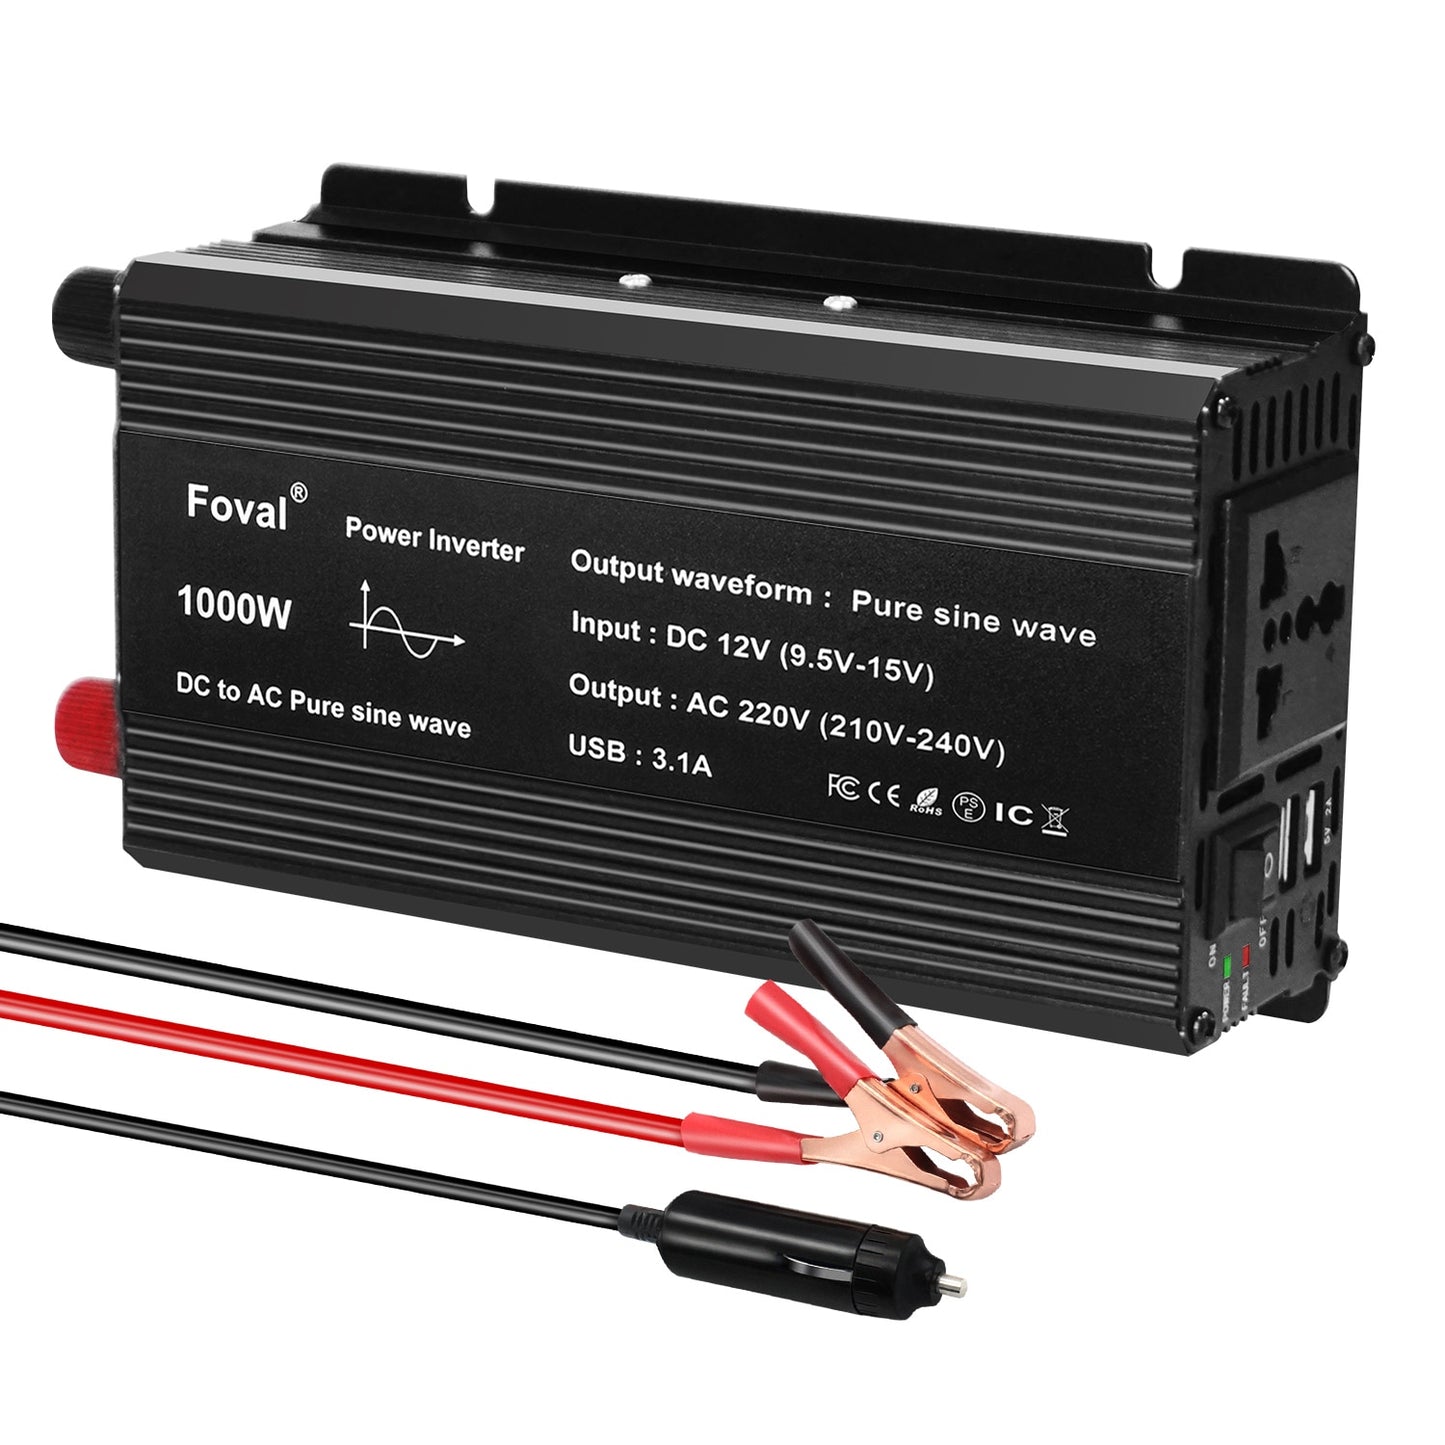 DC to Ac Ac IcX Foval Power " Inverter